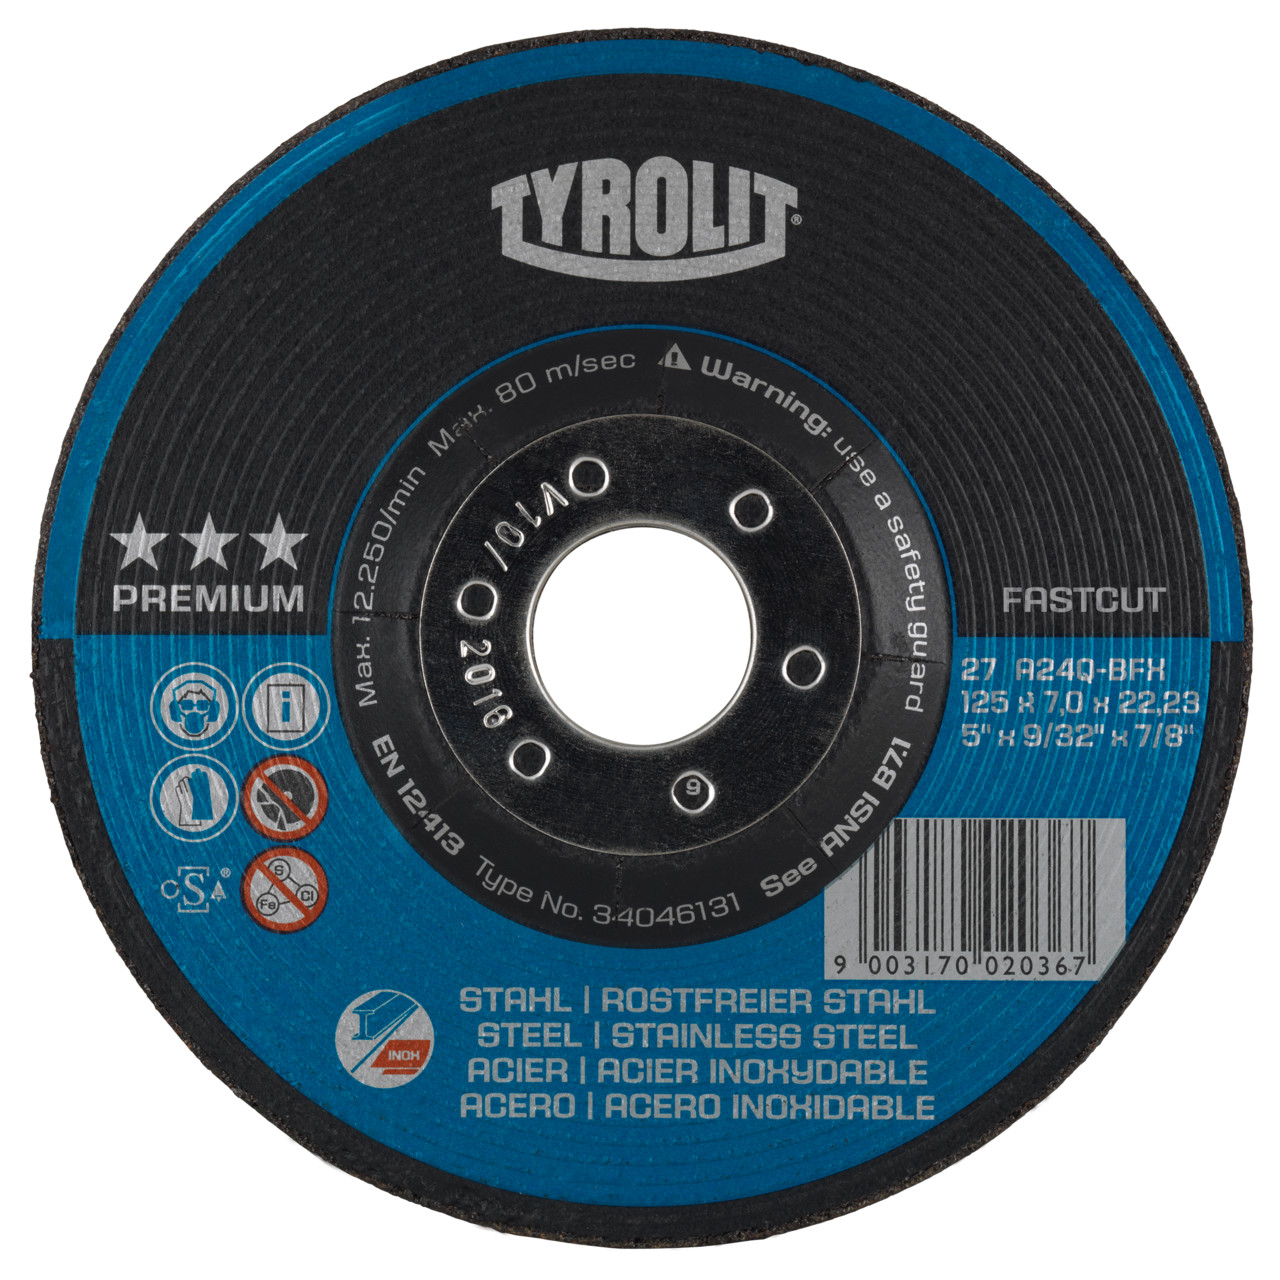 Tyrolit Roughing disc DxUxH 230x7x22.23 FASTCUT for steel and stainless steel, shape: 27 - offset version, Art. 5412